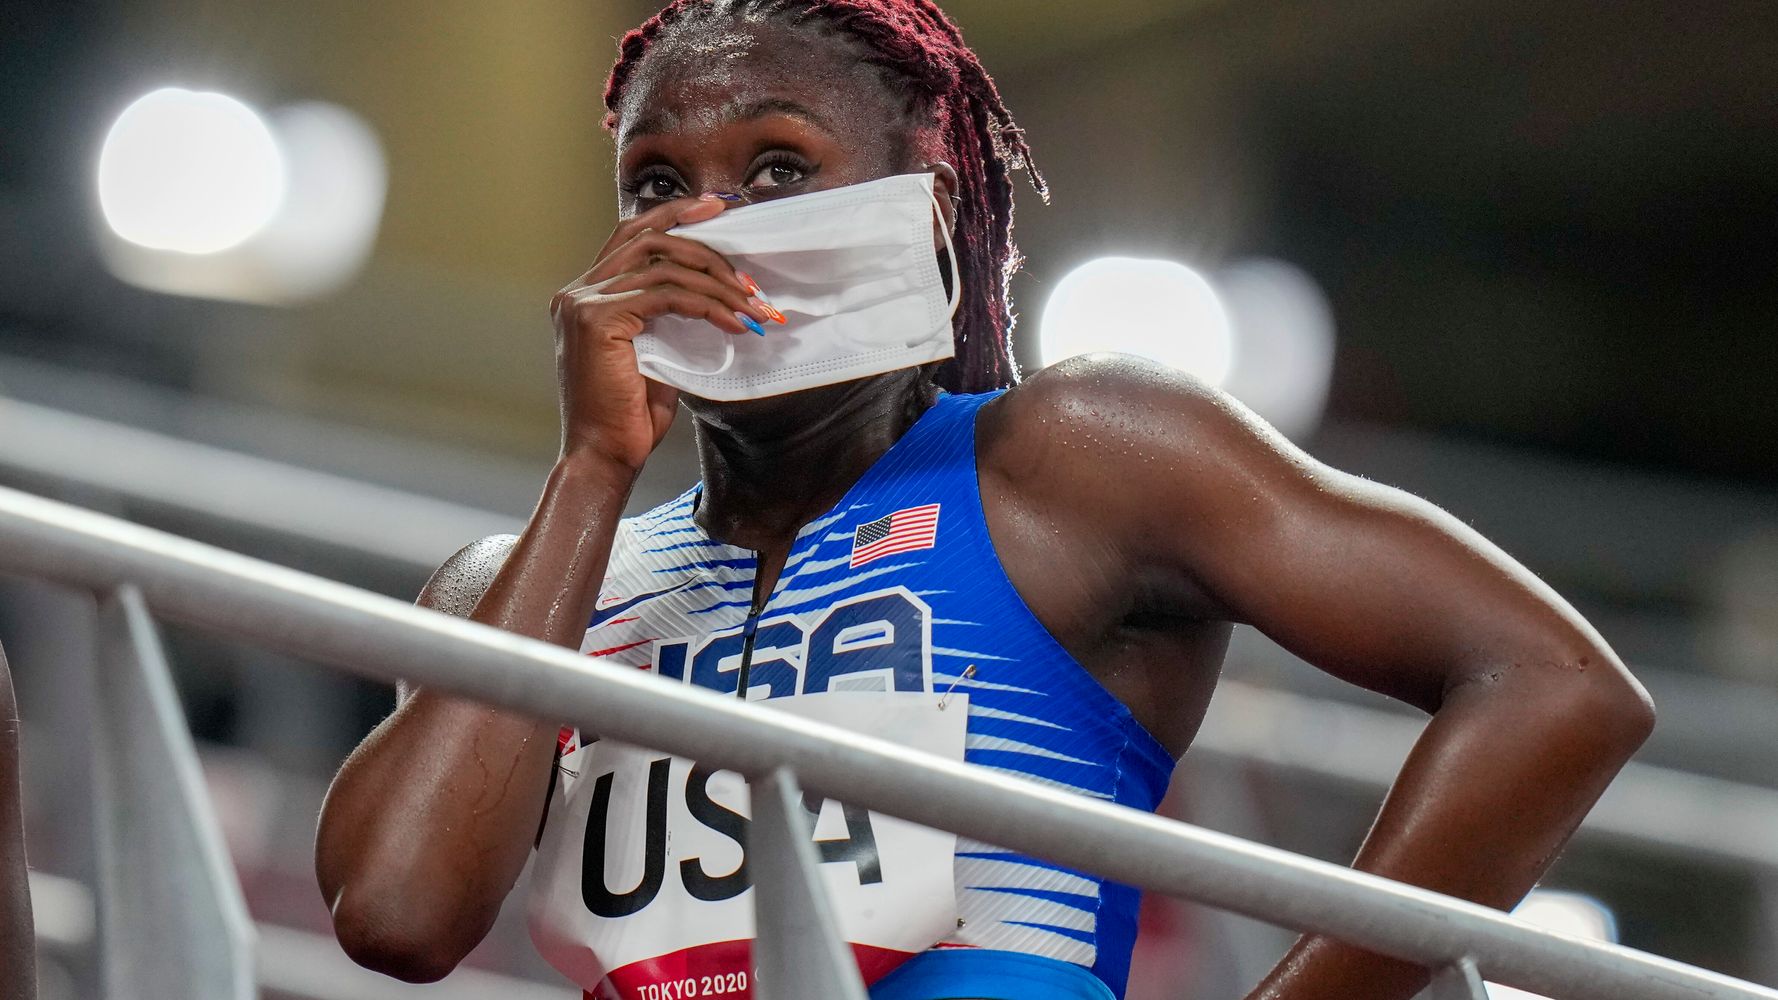 U.S. Off To Terrible Start In Tokyo Track Events With Relay Disqualification